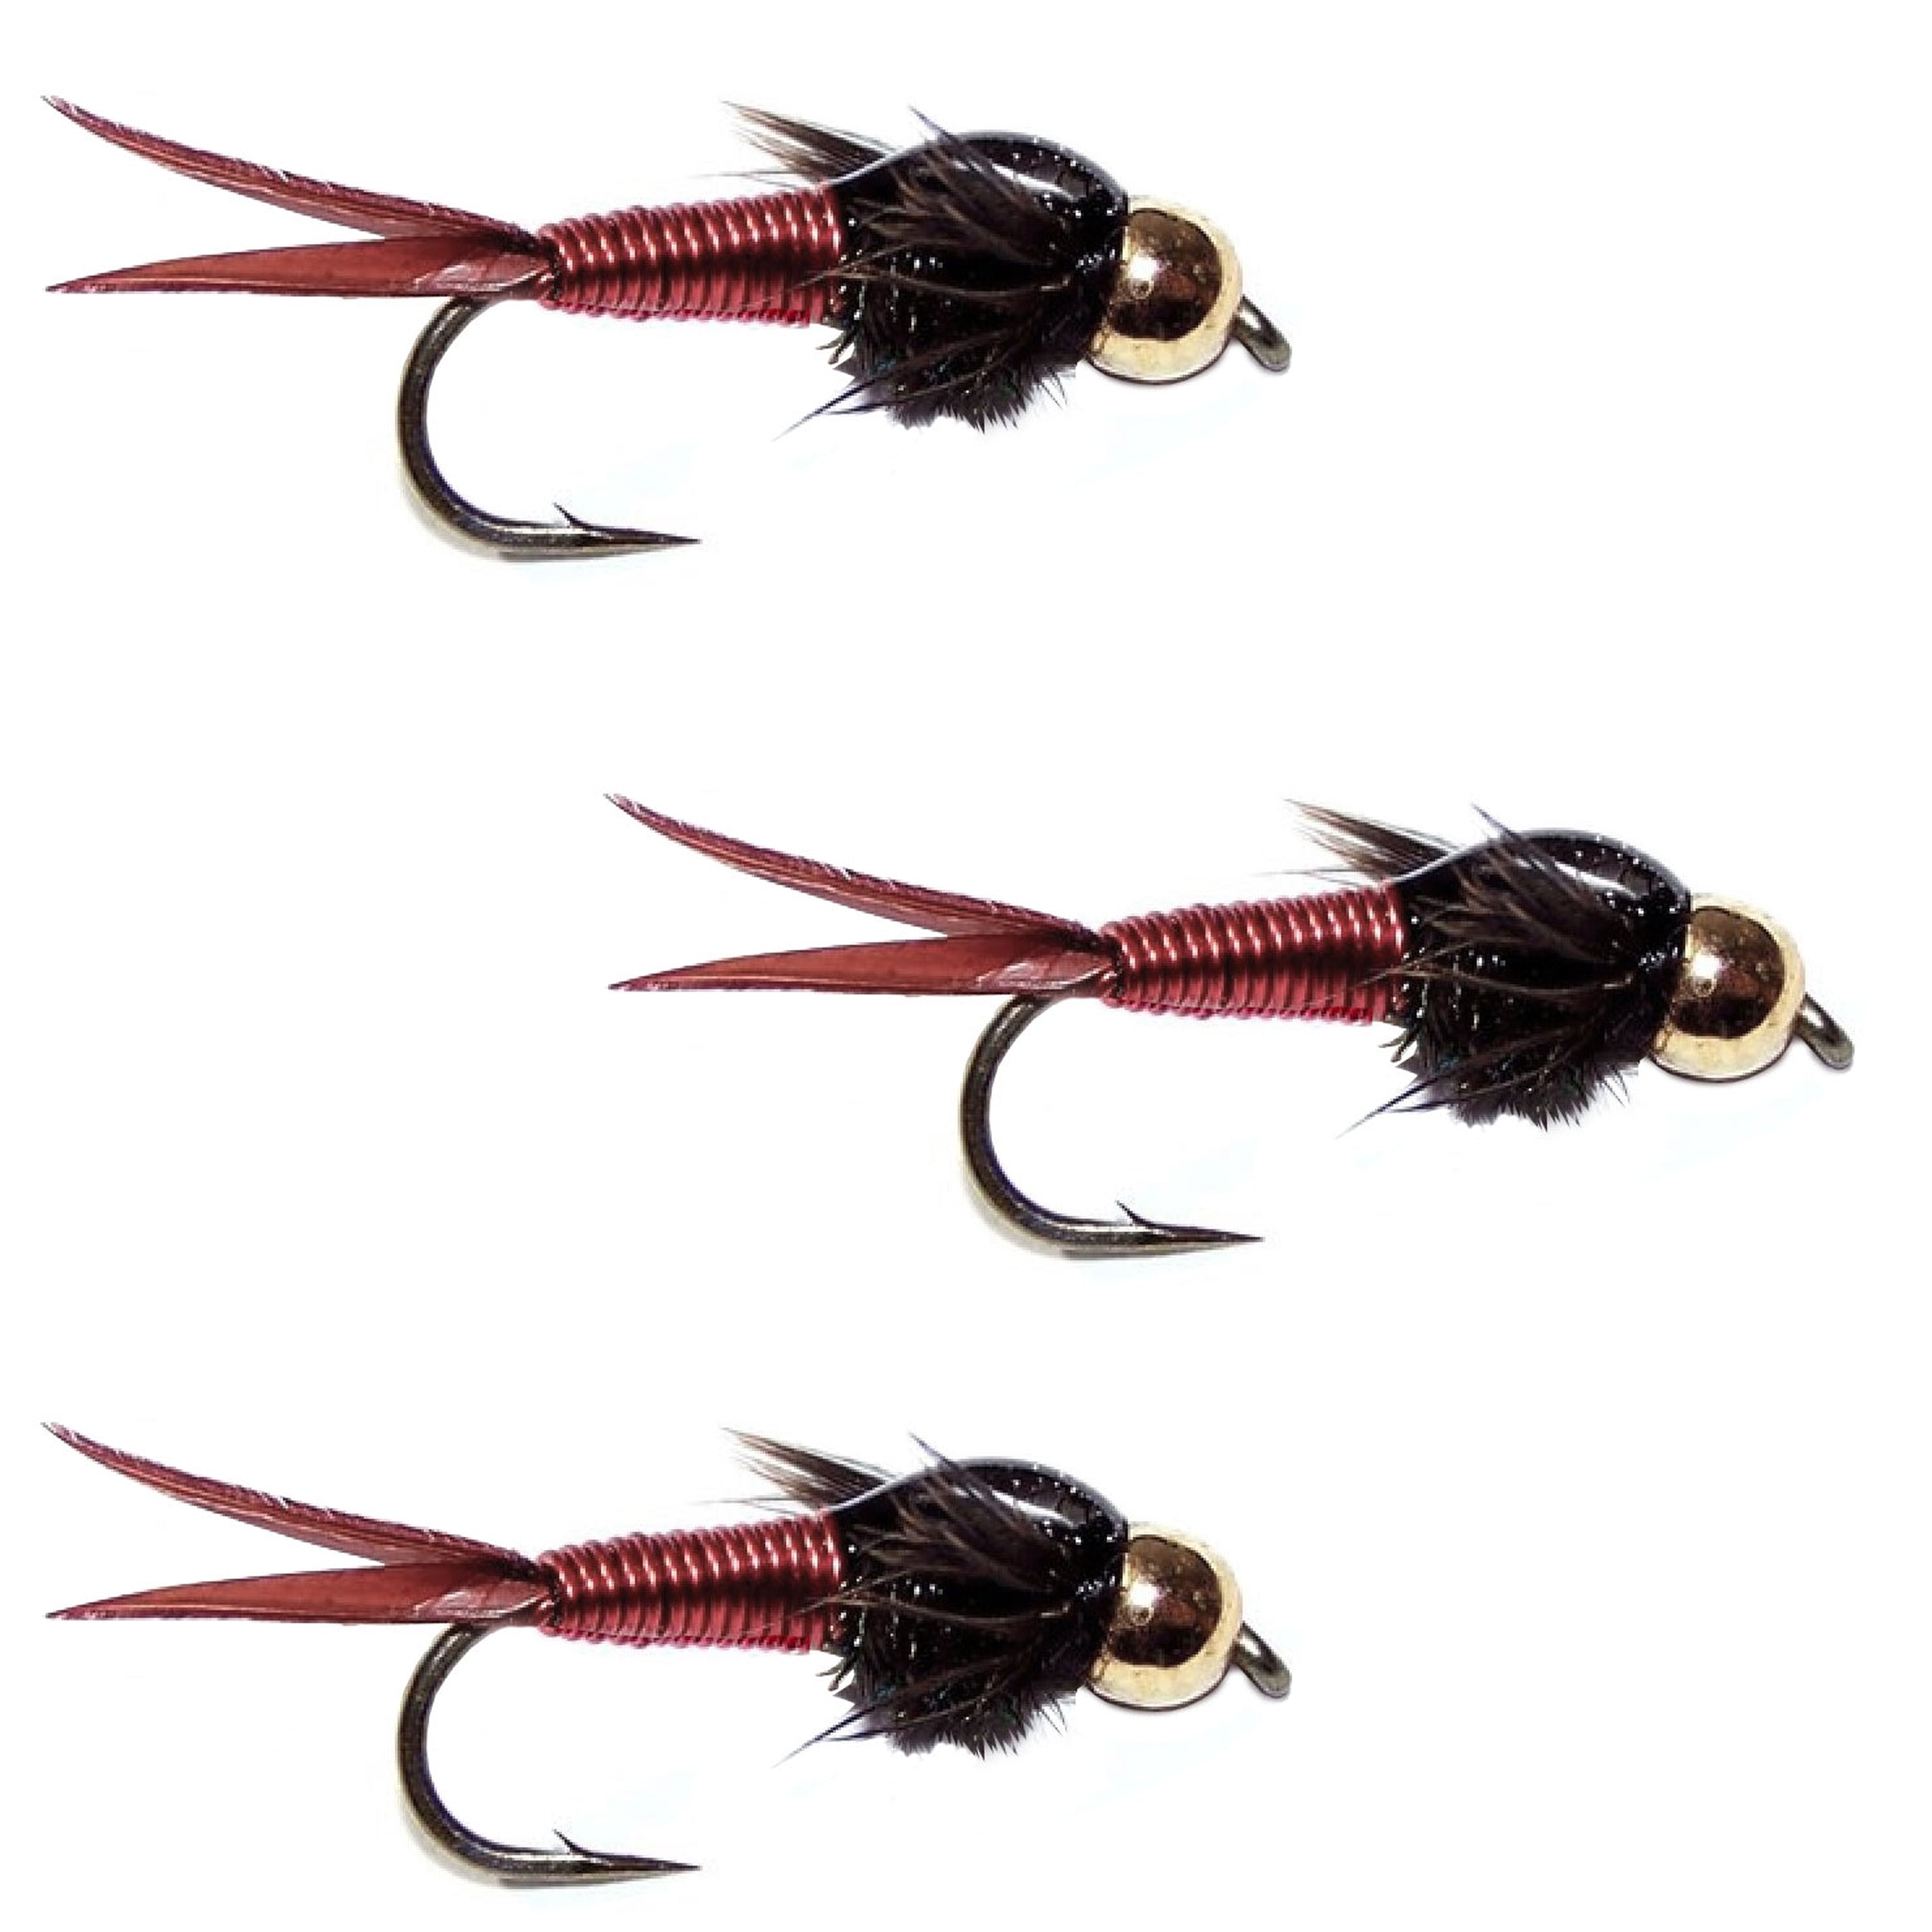 3 Pack Bead Head Red Copper John Nymph Fly Fishing Flies -  Hook Size 18